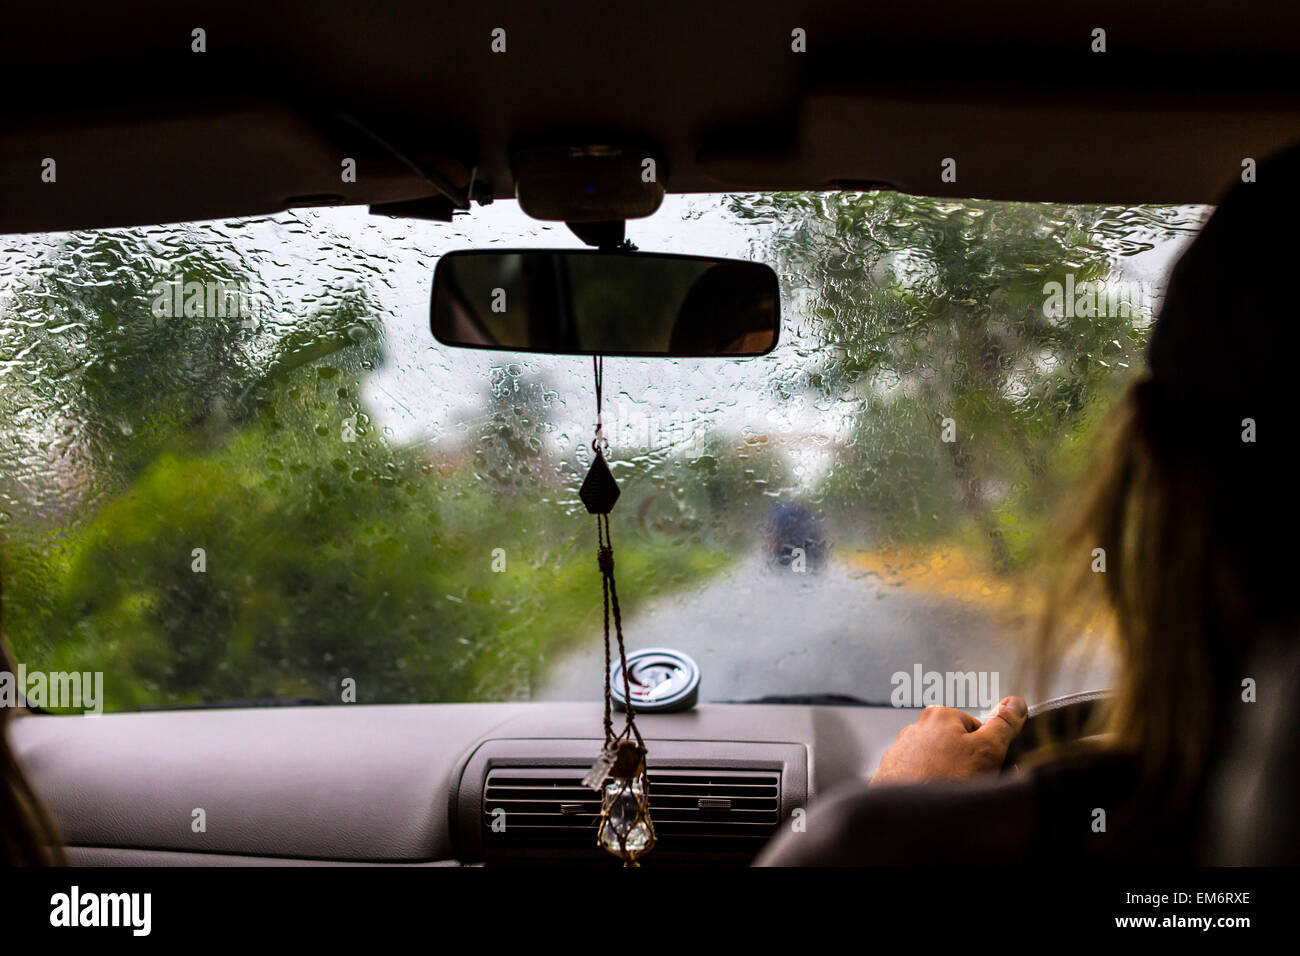 The raining weather on the way, travelling by car. Stock Photo